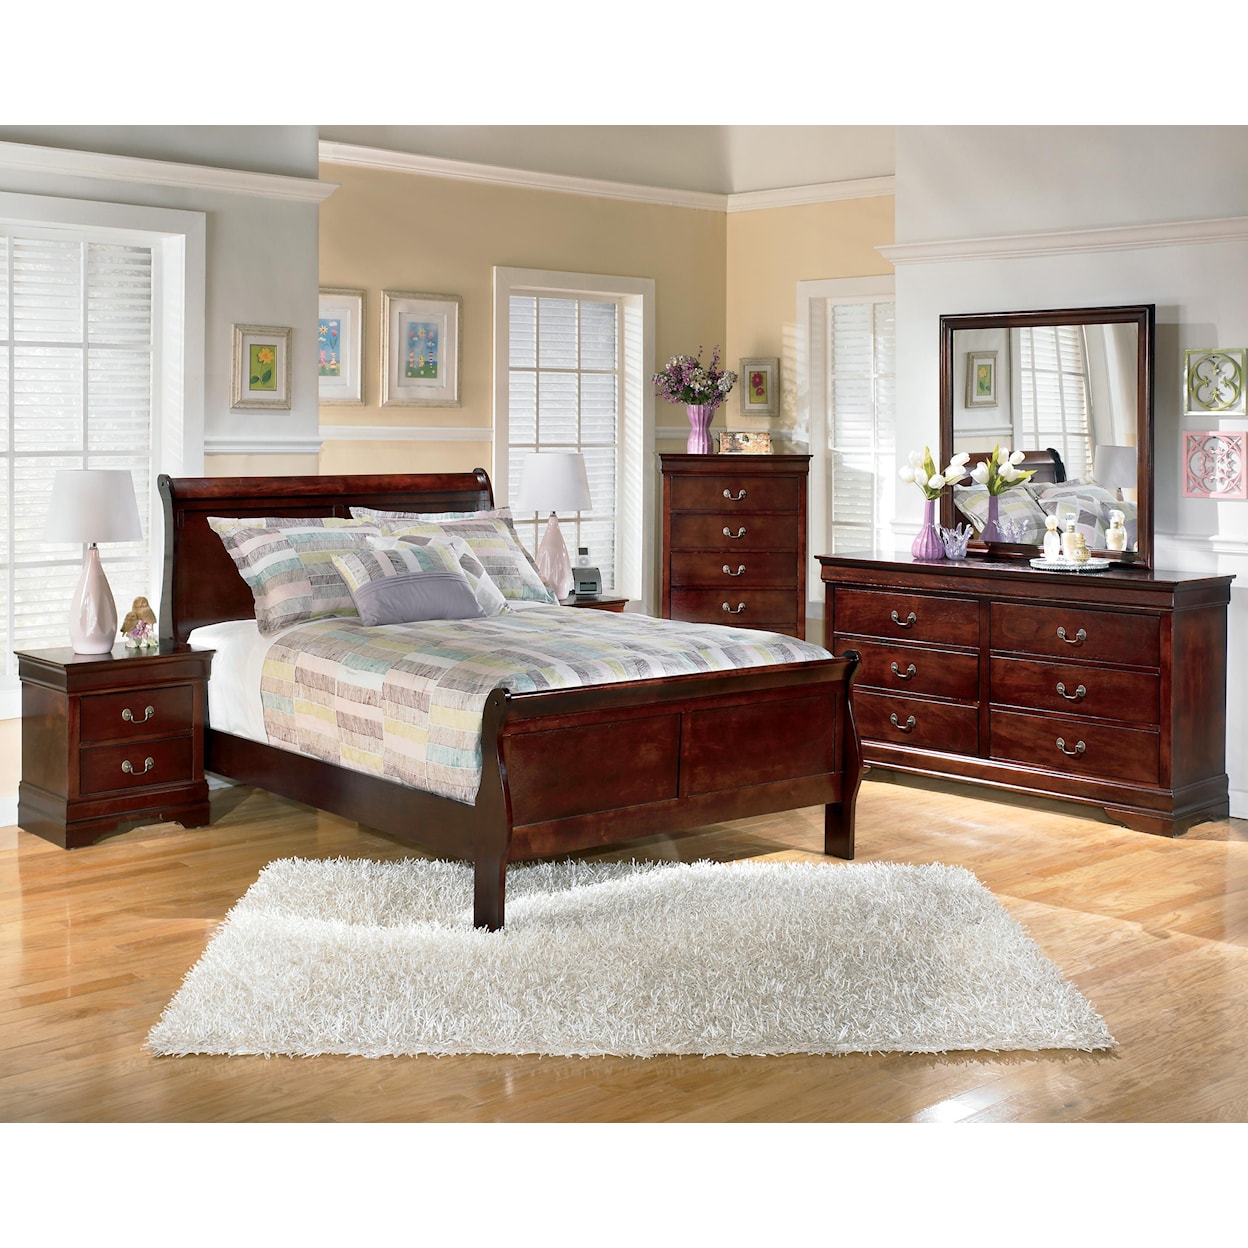 Signature Design by Ashley Alisdair 7 Piece Full Bedroom Group